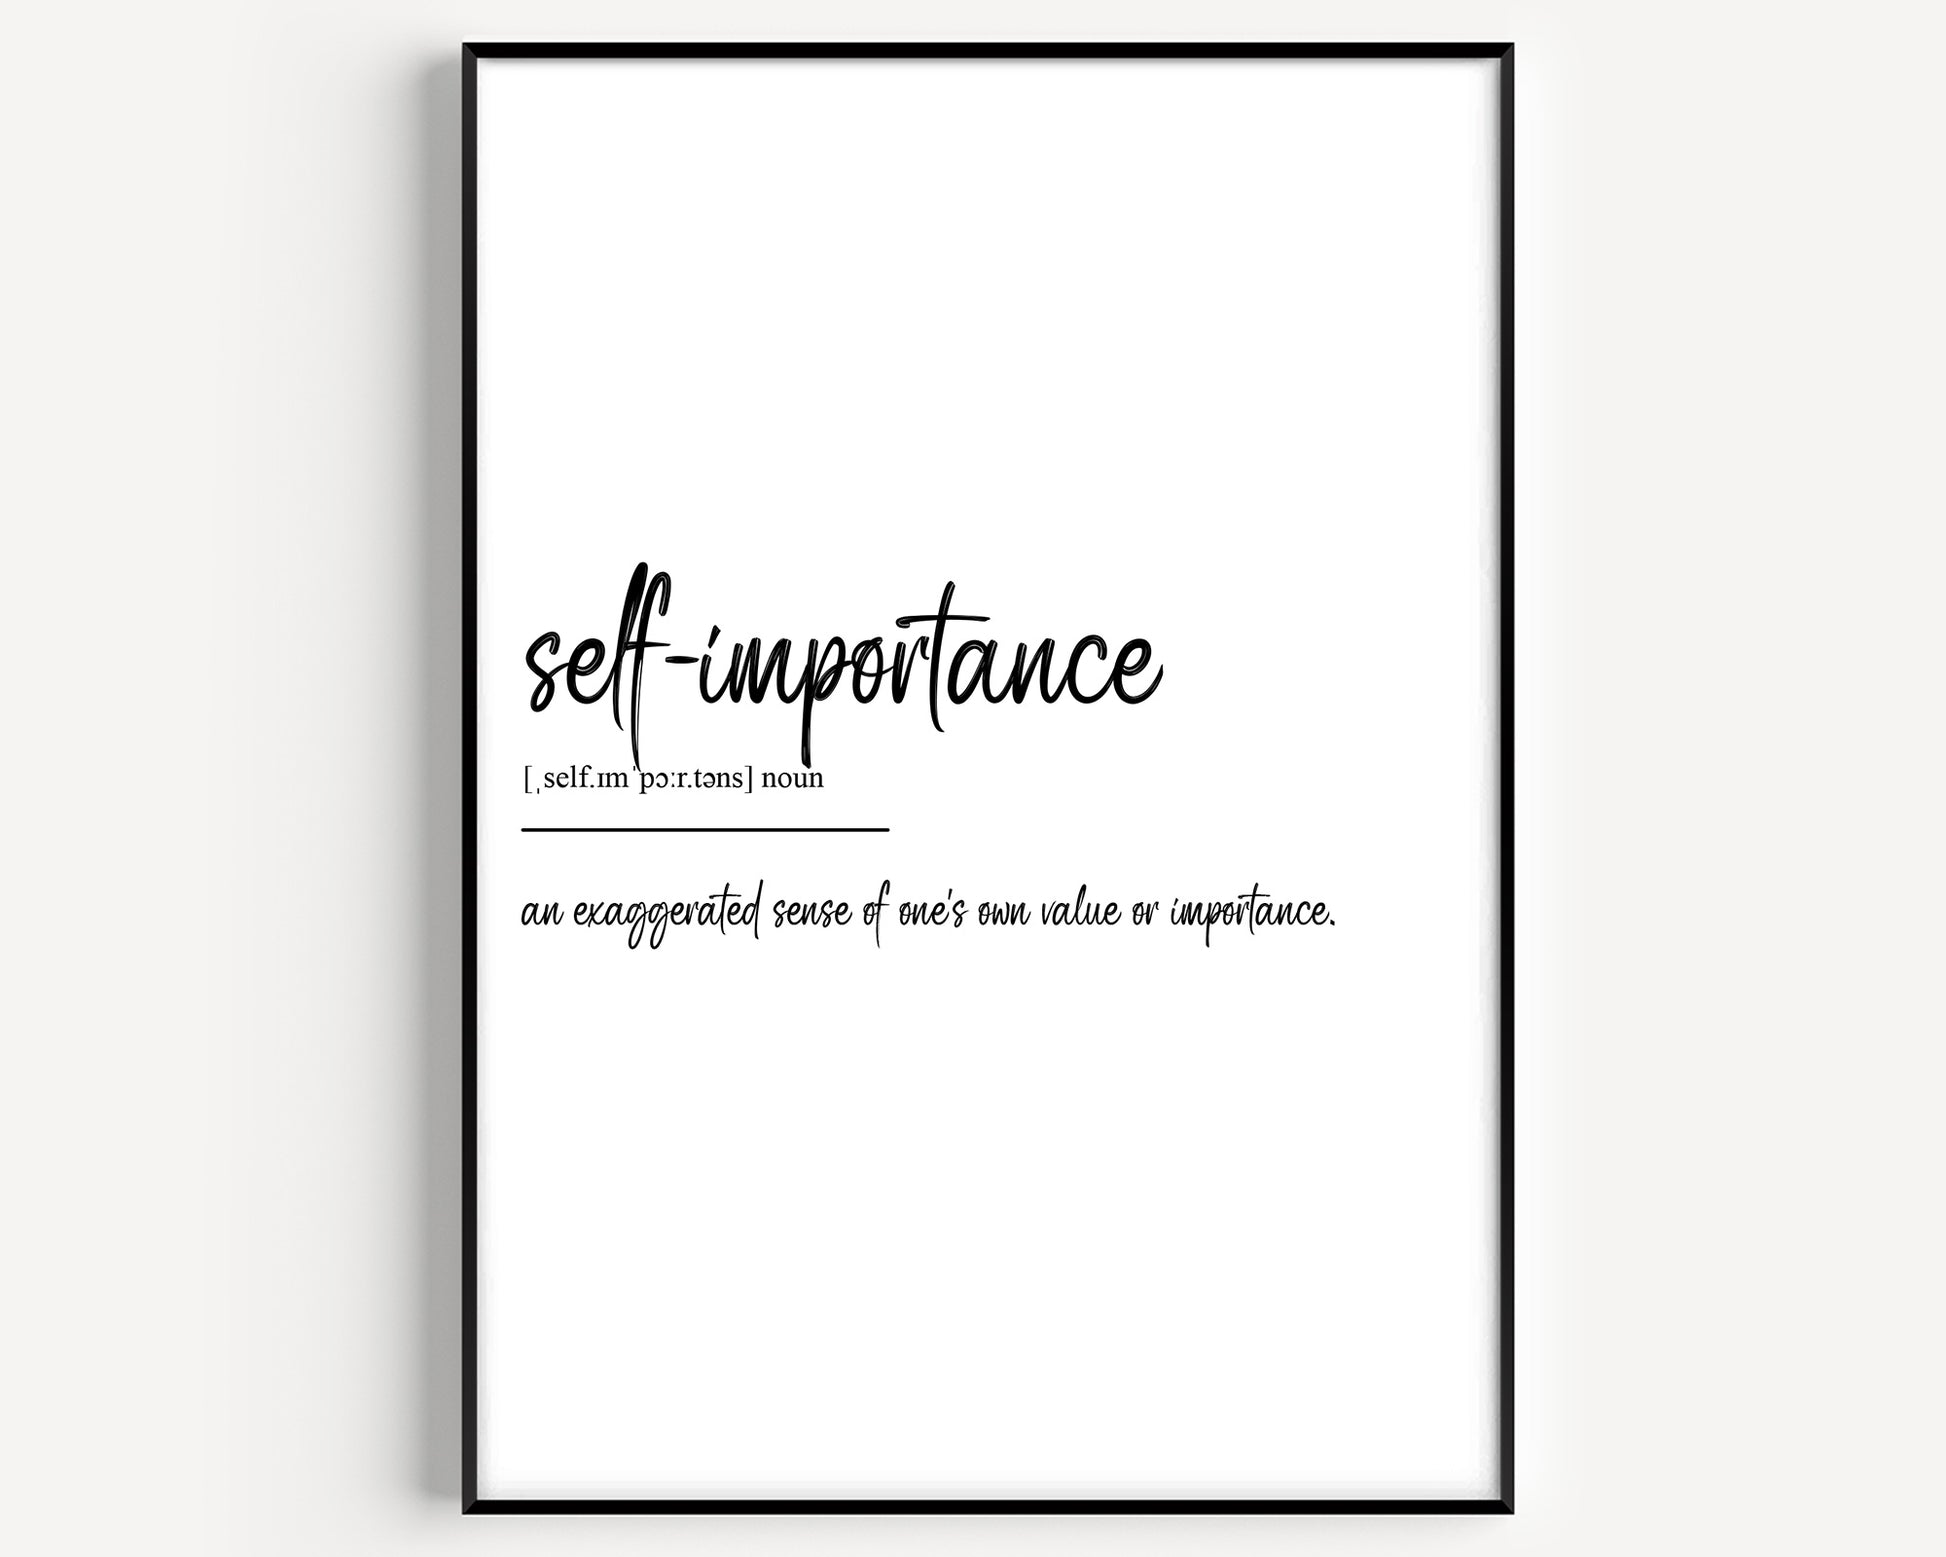 Self Importance Definition Print - Magic Posters